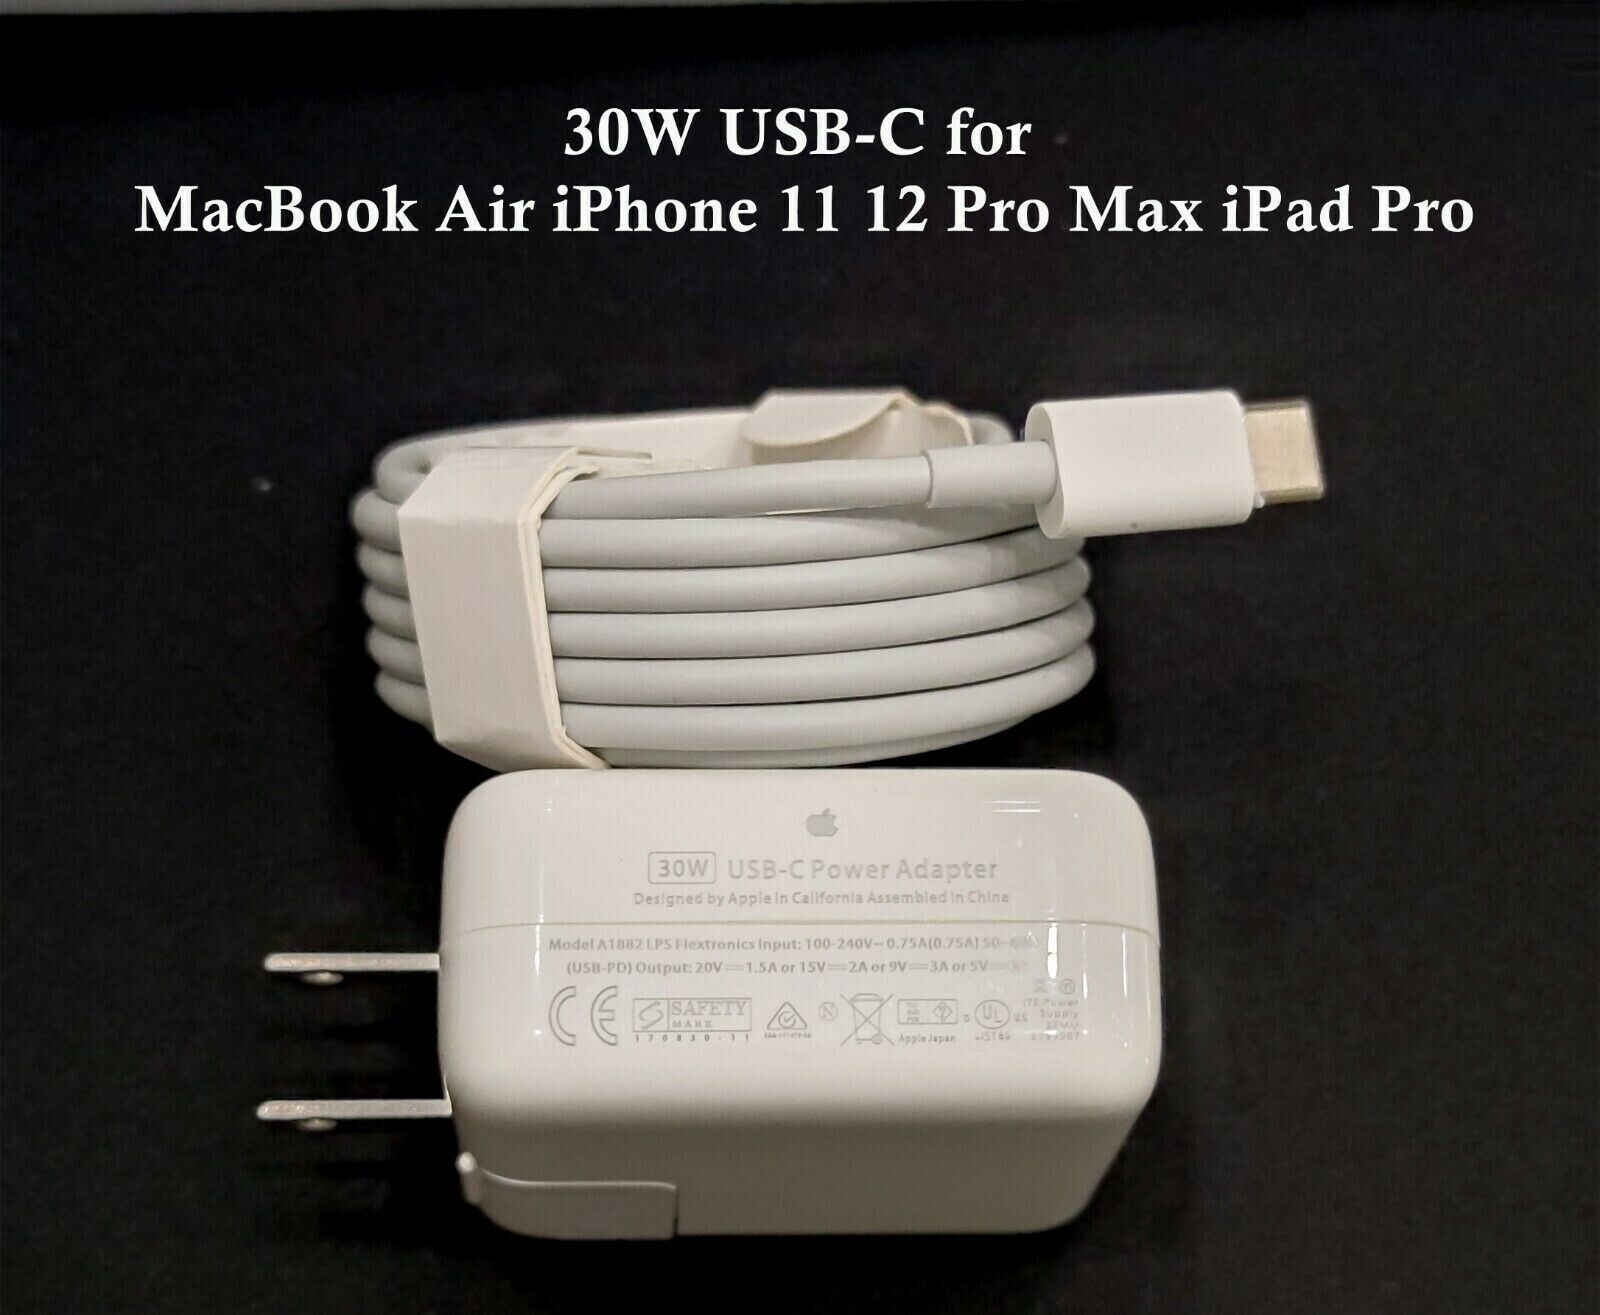 OEM 30W USB-C Power Adapter Charger for apple MacBook Air iPhone 11 12 Pro +Cord